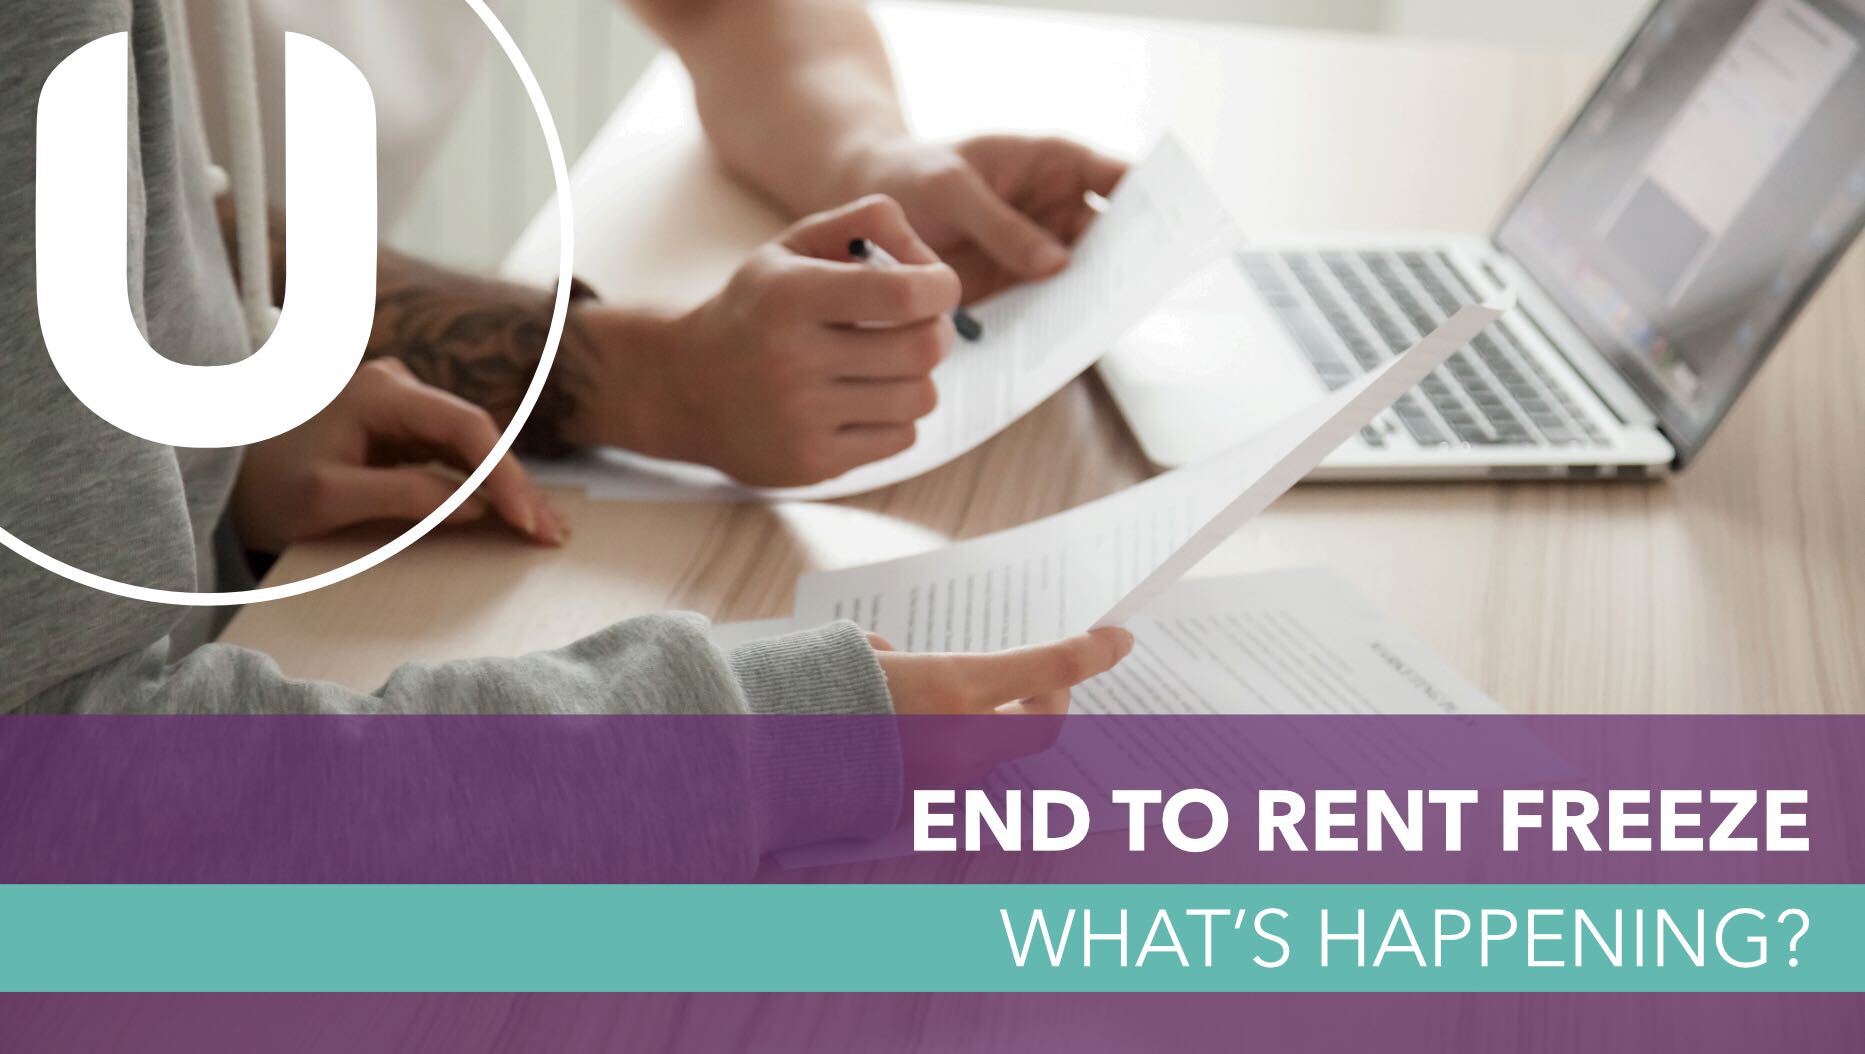 End to Rent Freeze